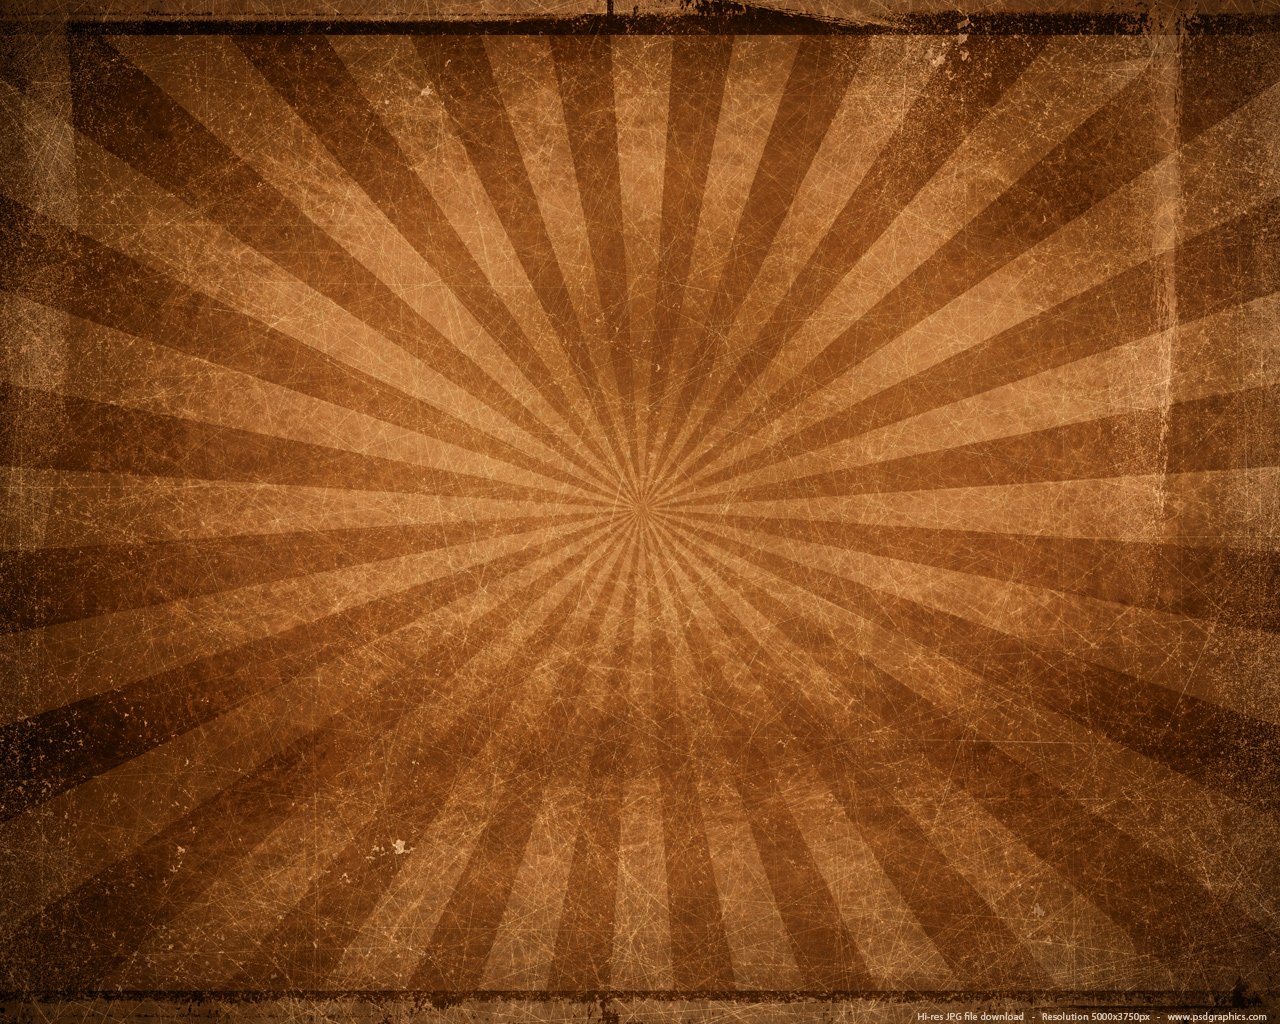 Medium size preview 1280x1024px Brown retro background